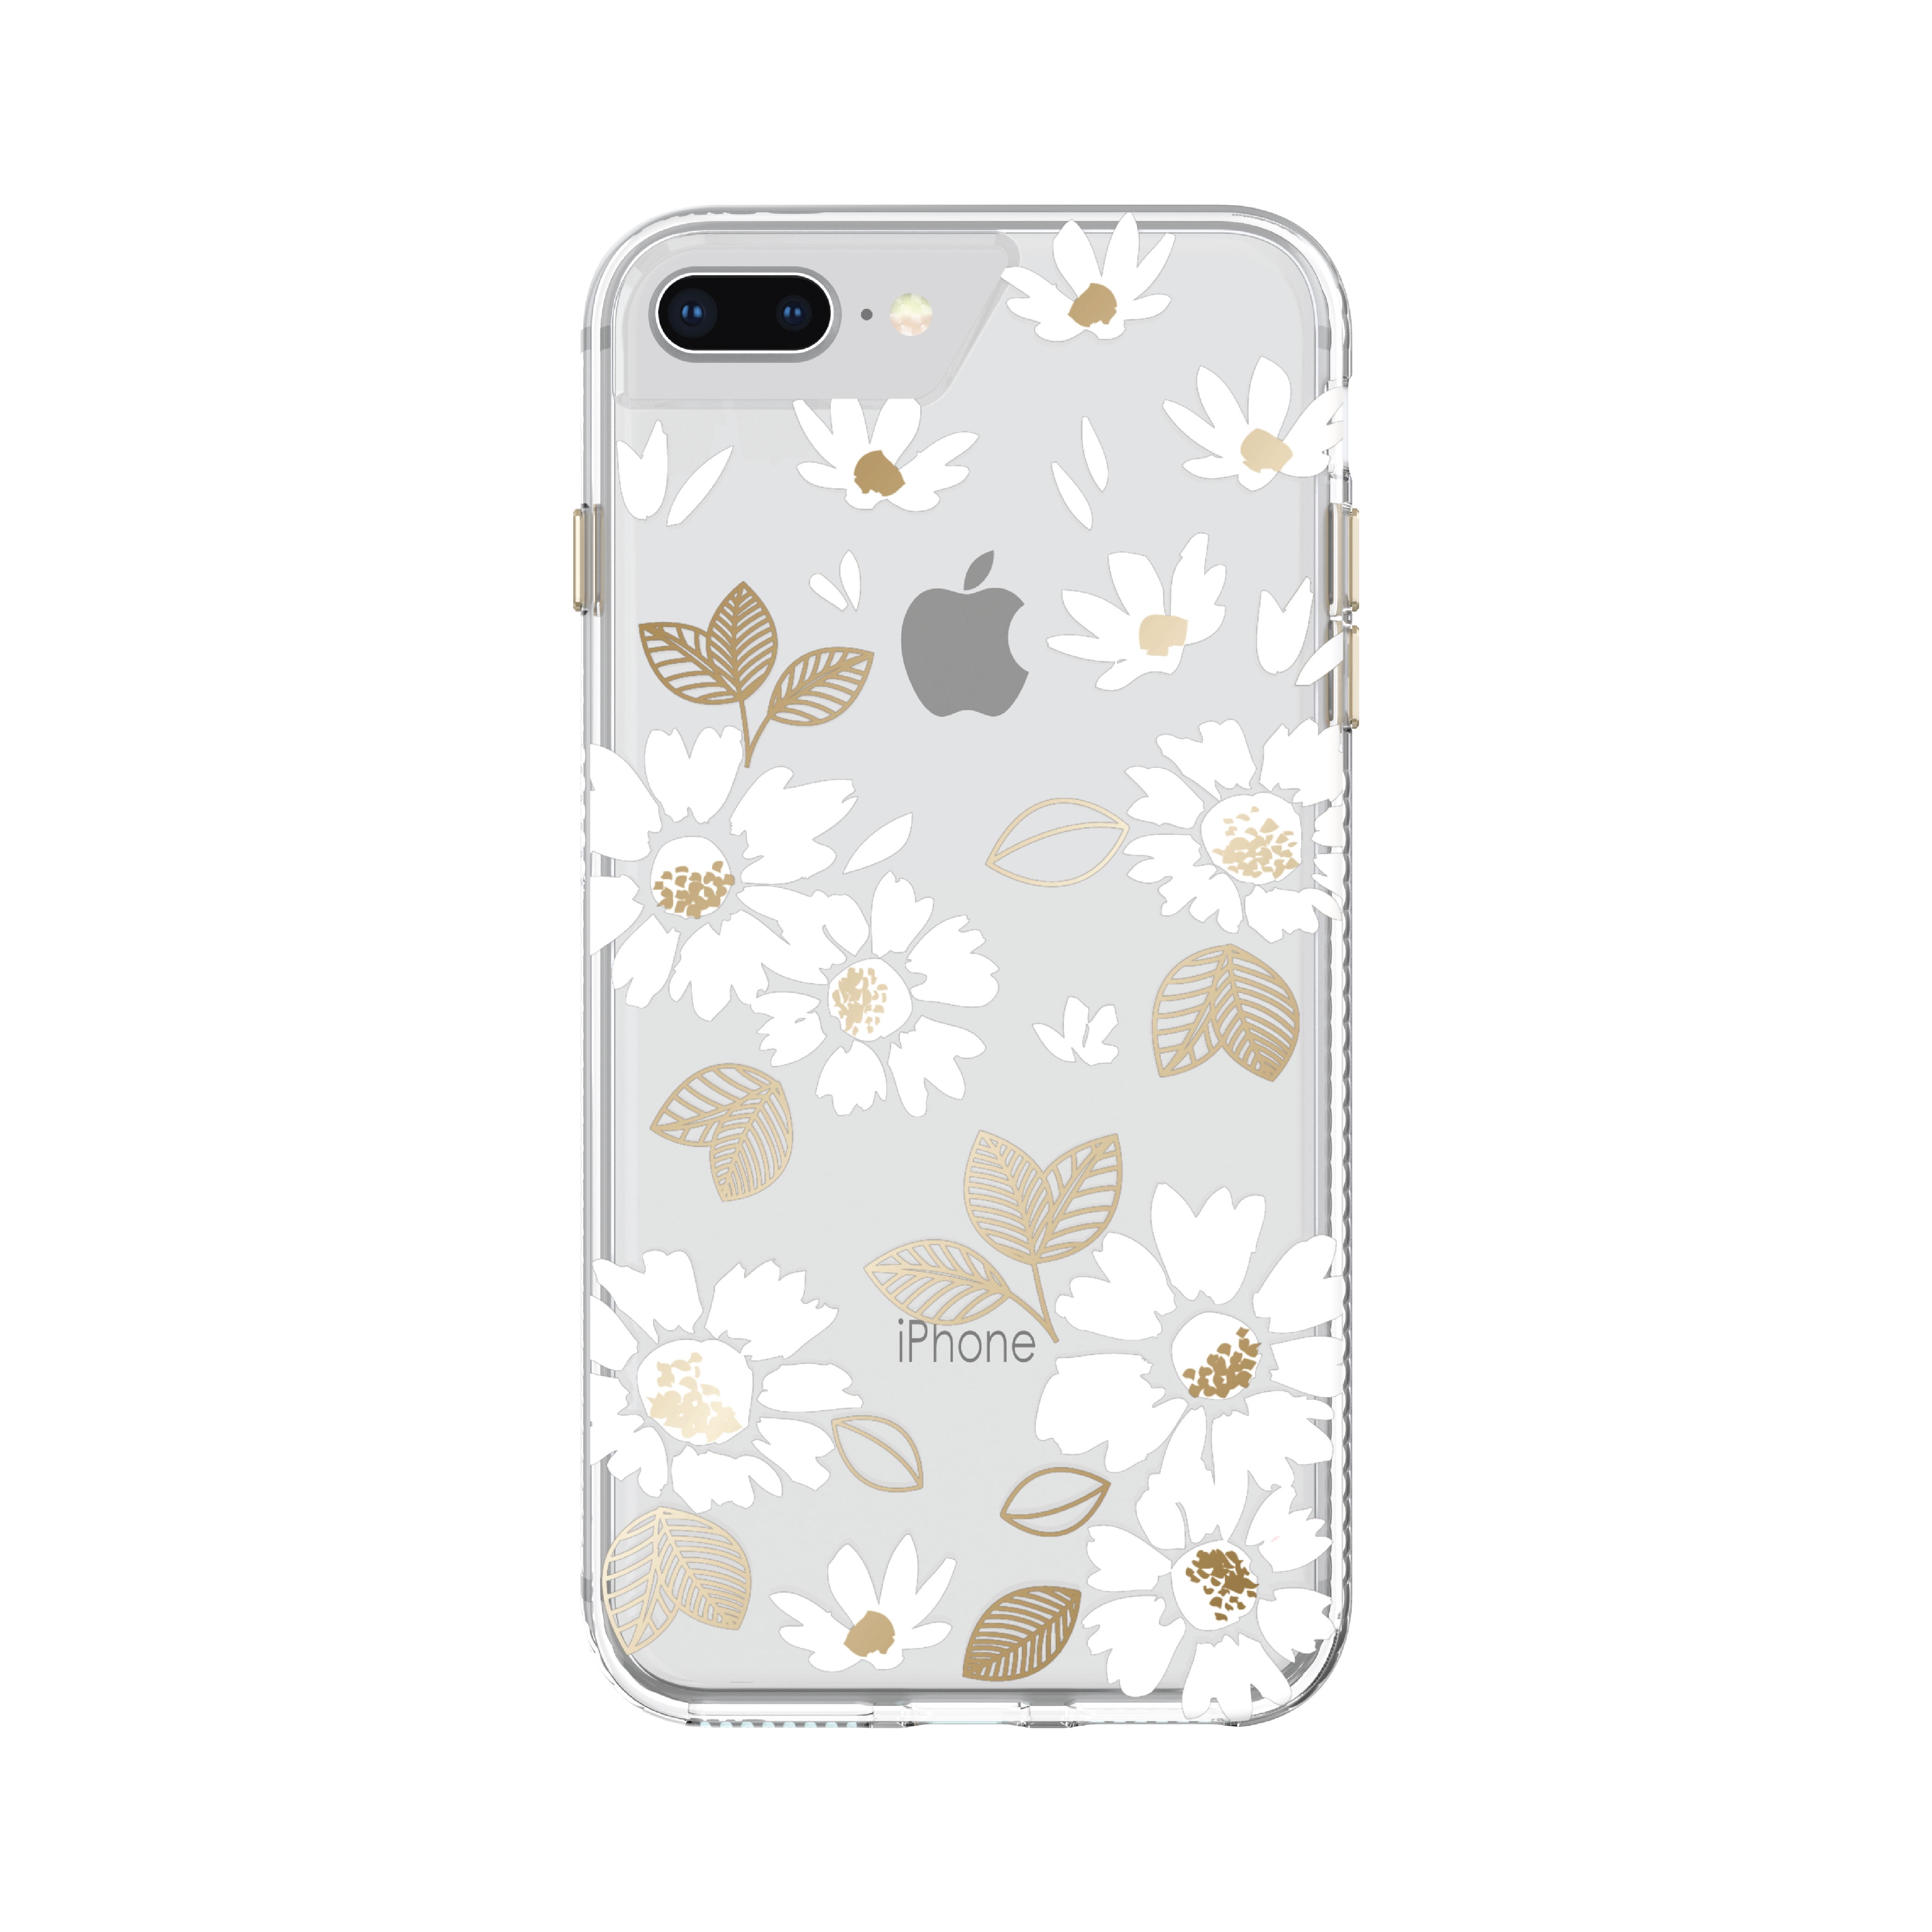 Clear White Floral Phone Case for iPhone 6 Plus, iPhone 6s iPhone Plus, iPhone 8 Plus -